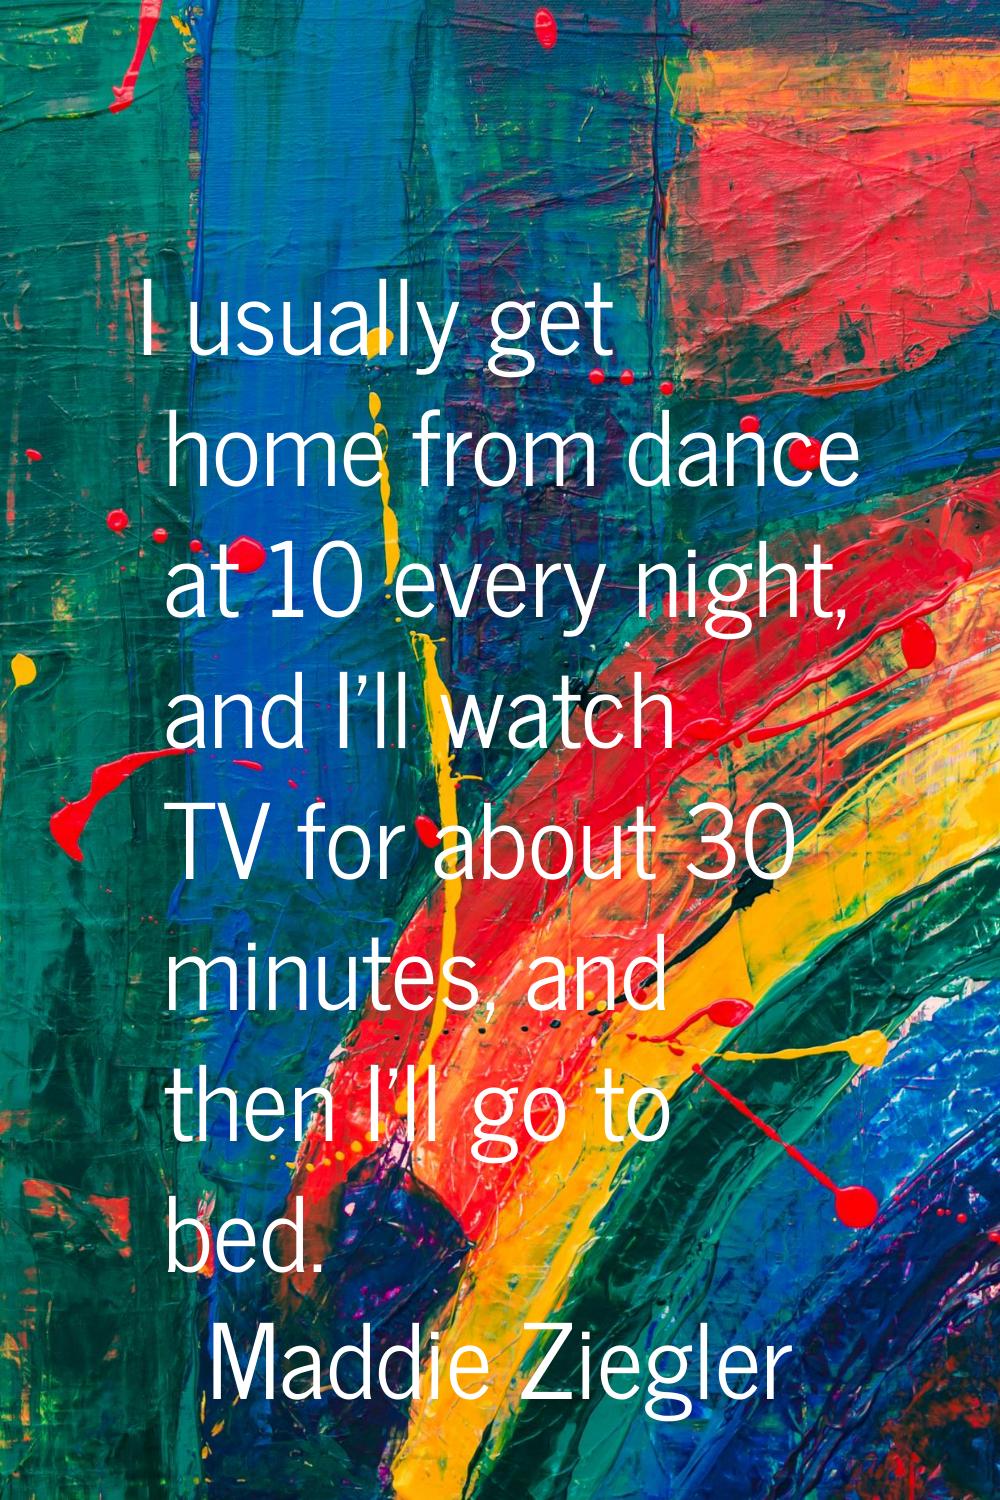 I usually get home from dance at 10 every night, and I'll watch TV for about 30 minutes, and then I